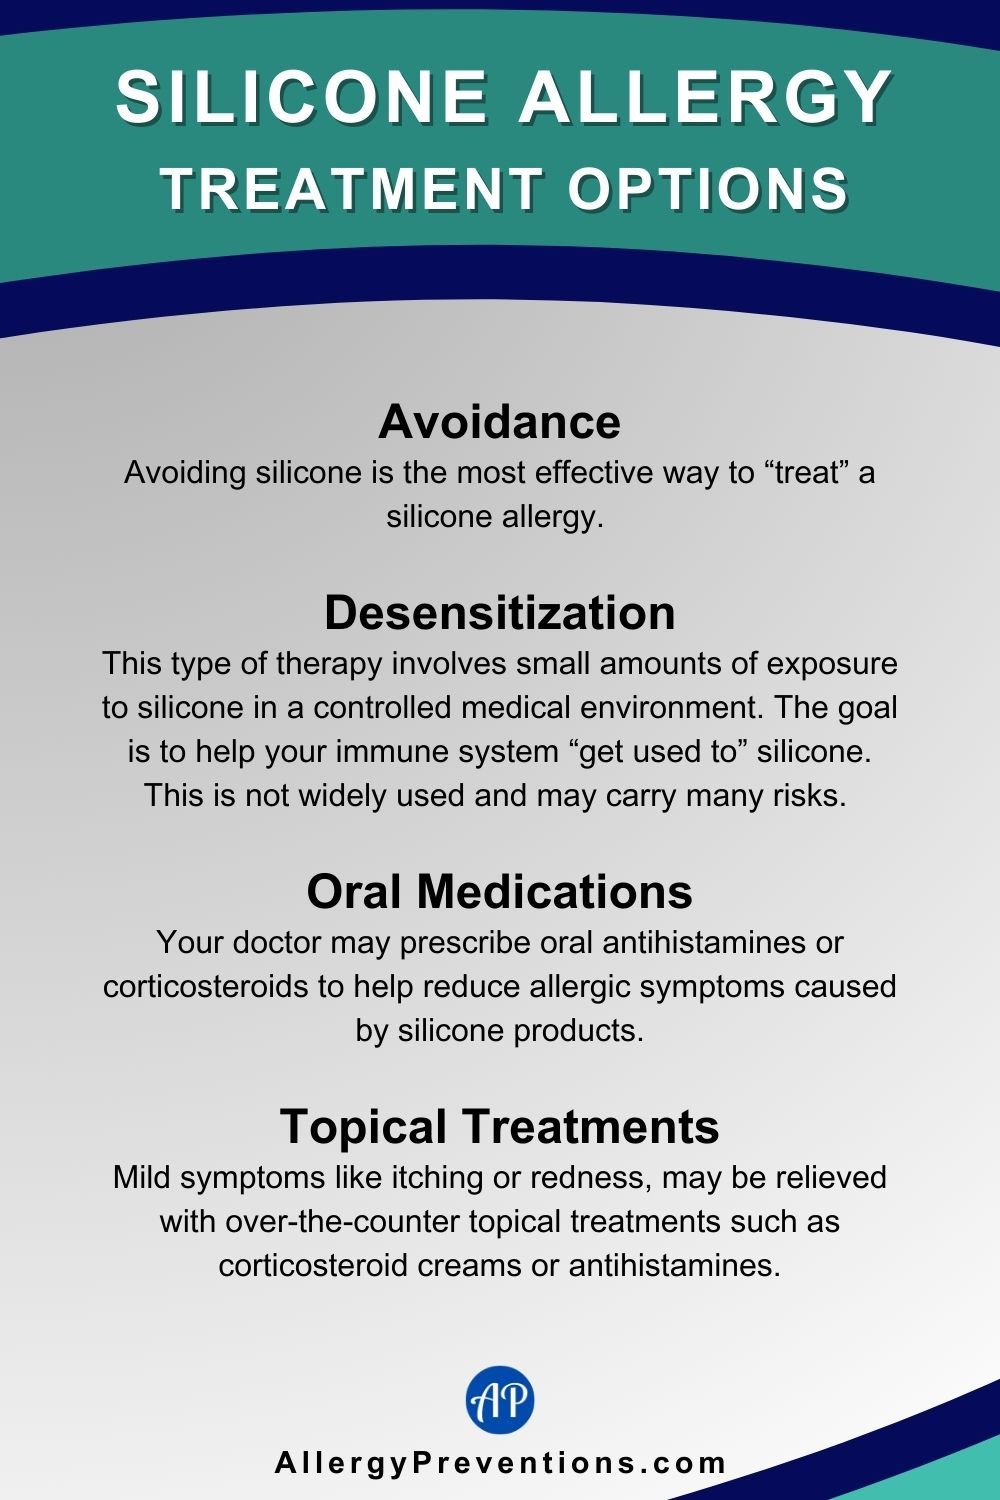 Silicone Allergy Treatment Options Infographic. Treatment for silicone allergies consist of the following: Avoidance: Avoiding silicone is the most effective way to “treat” a silicone allergy. Desensitization: This type of therapy involves small amounts of exposure to silicone in a controlled medical environment. The goal is to help your immune system “get used to” silicone. This is not widely used and may carry many risks. Oral Medications: Your doctor may prescribe oral antihistamines or corticosteroids to help reduce allergic symptoms caused by silicone products. Topical Treatments: Mild symptoms like itching or redness, may be relieved with over-the-counter topical treatments such as corticosteroid creams or antihistamines.